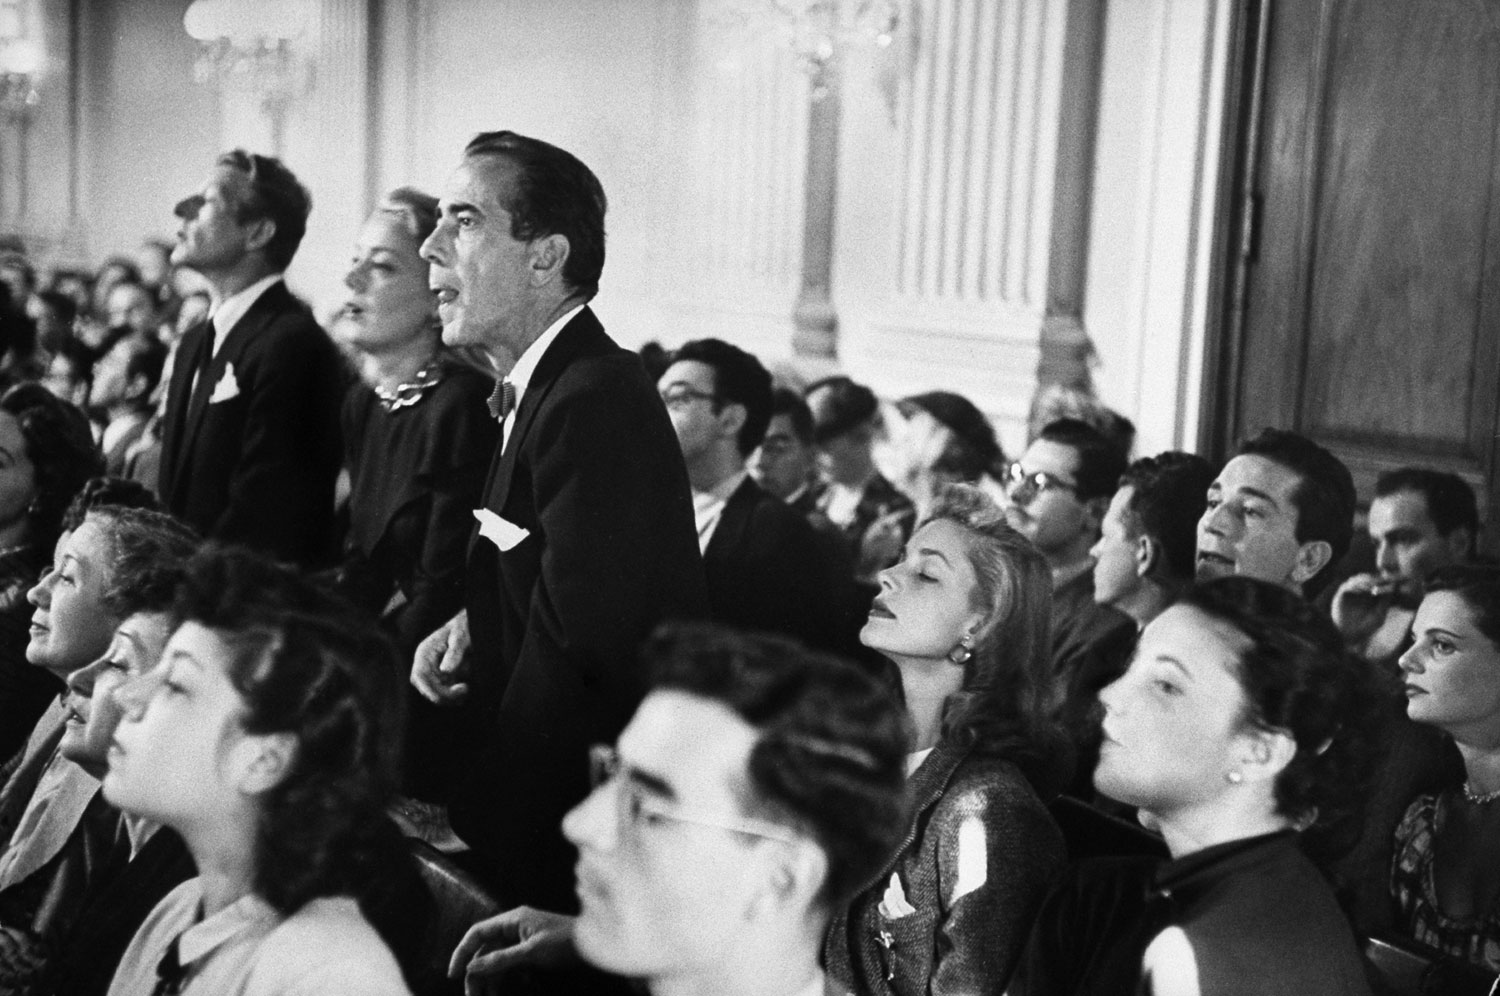 From left: Danny Kaye, June Havoc and Humphrey Bogart, with wife Lauren Bacall sitting beside him, listen intently at the House Un-American Activities Committee hearings in 1947.